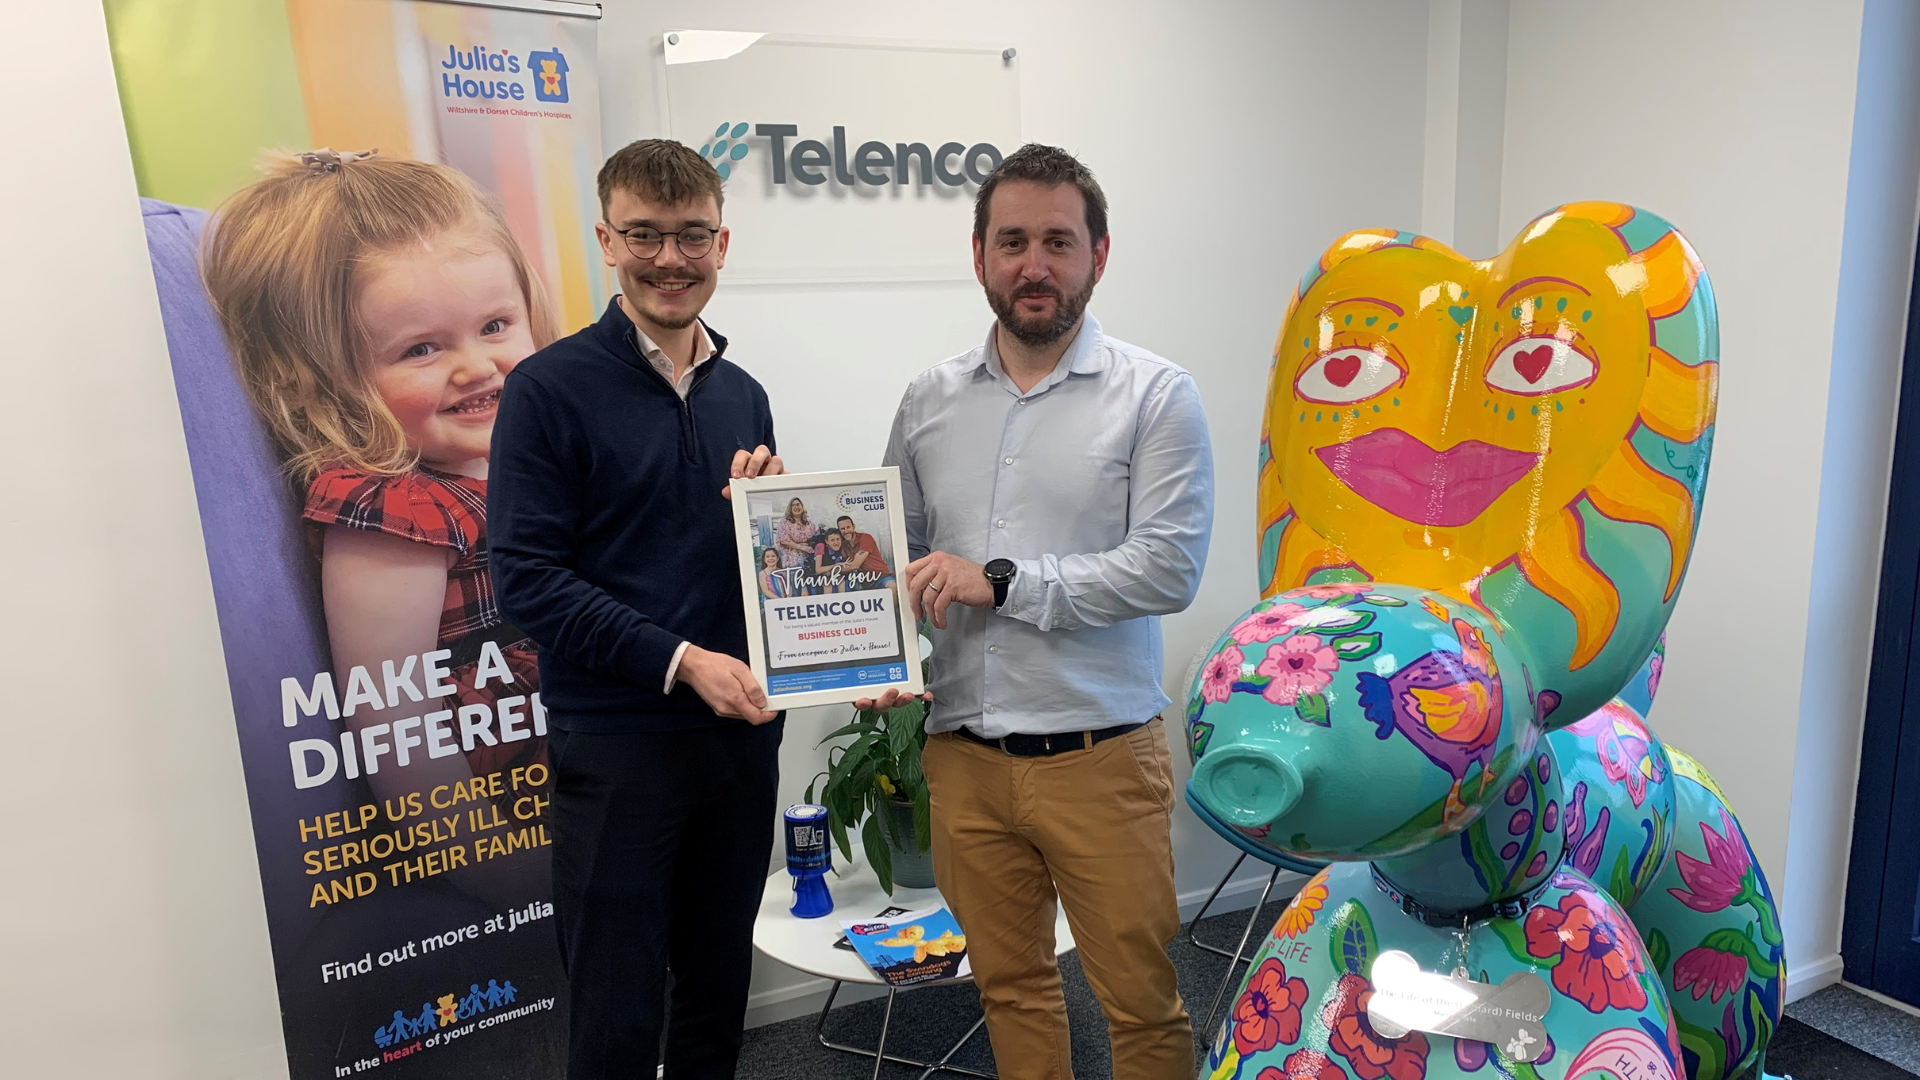 Telenco UK Continues Support of Julia's House Children Hospice.